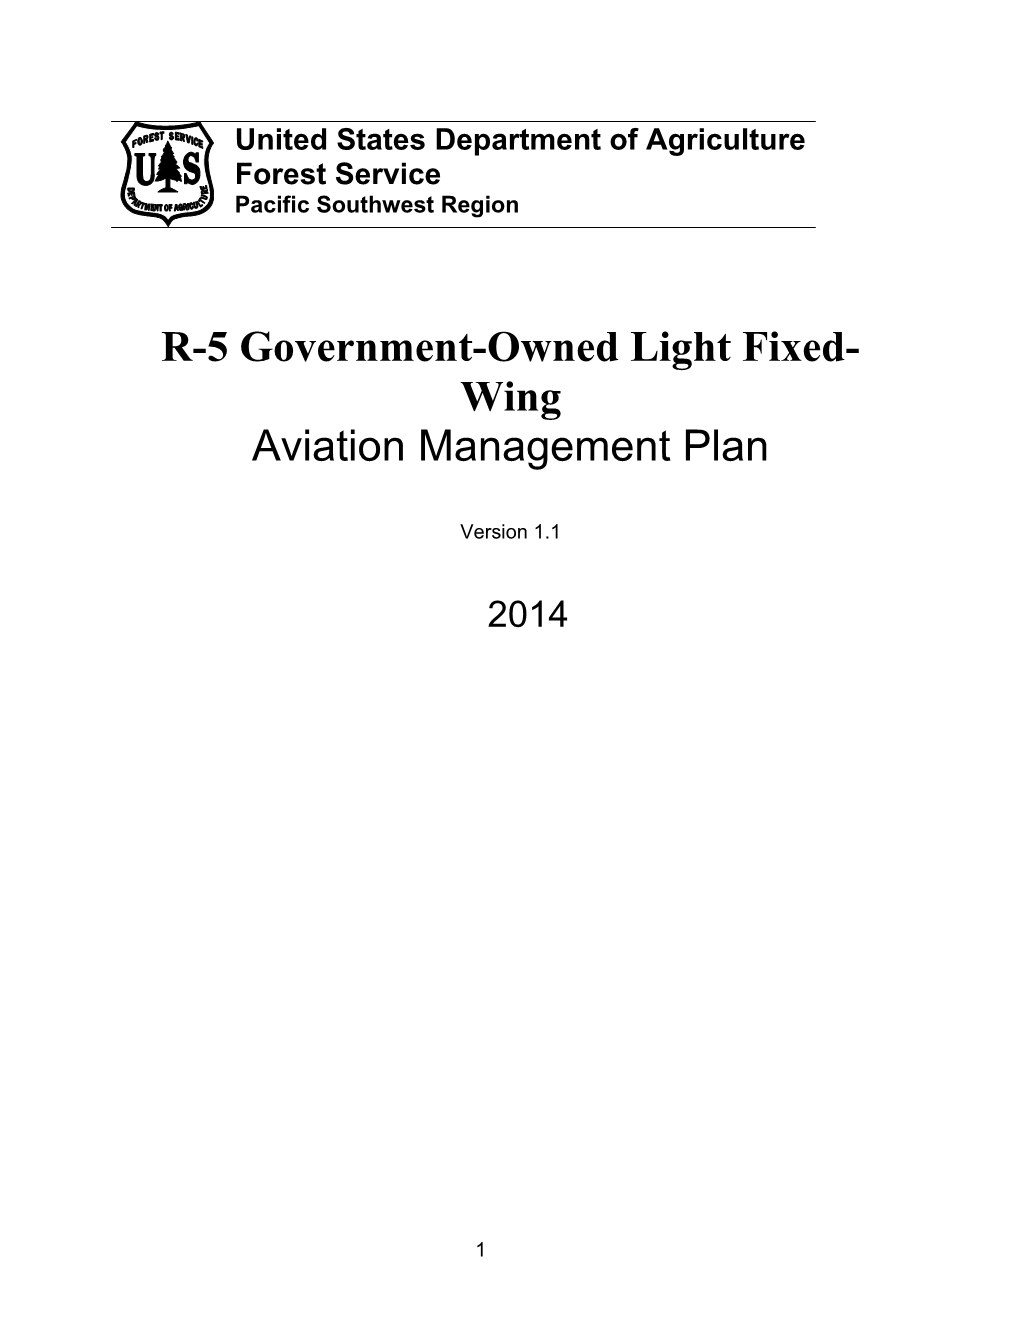 R-5 Government-Owned Light Fixed-Wing